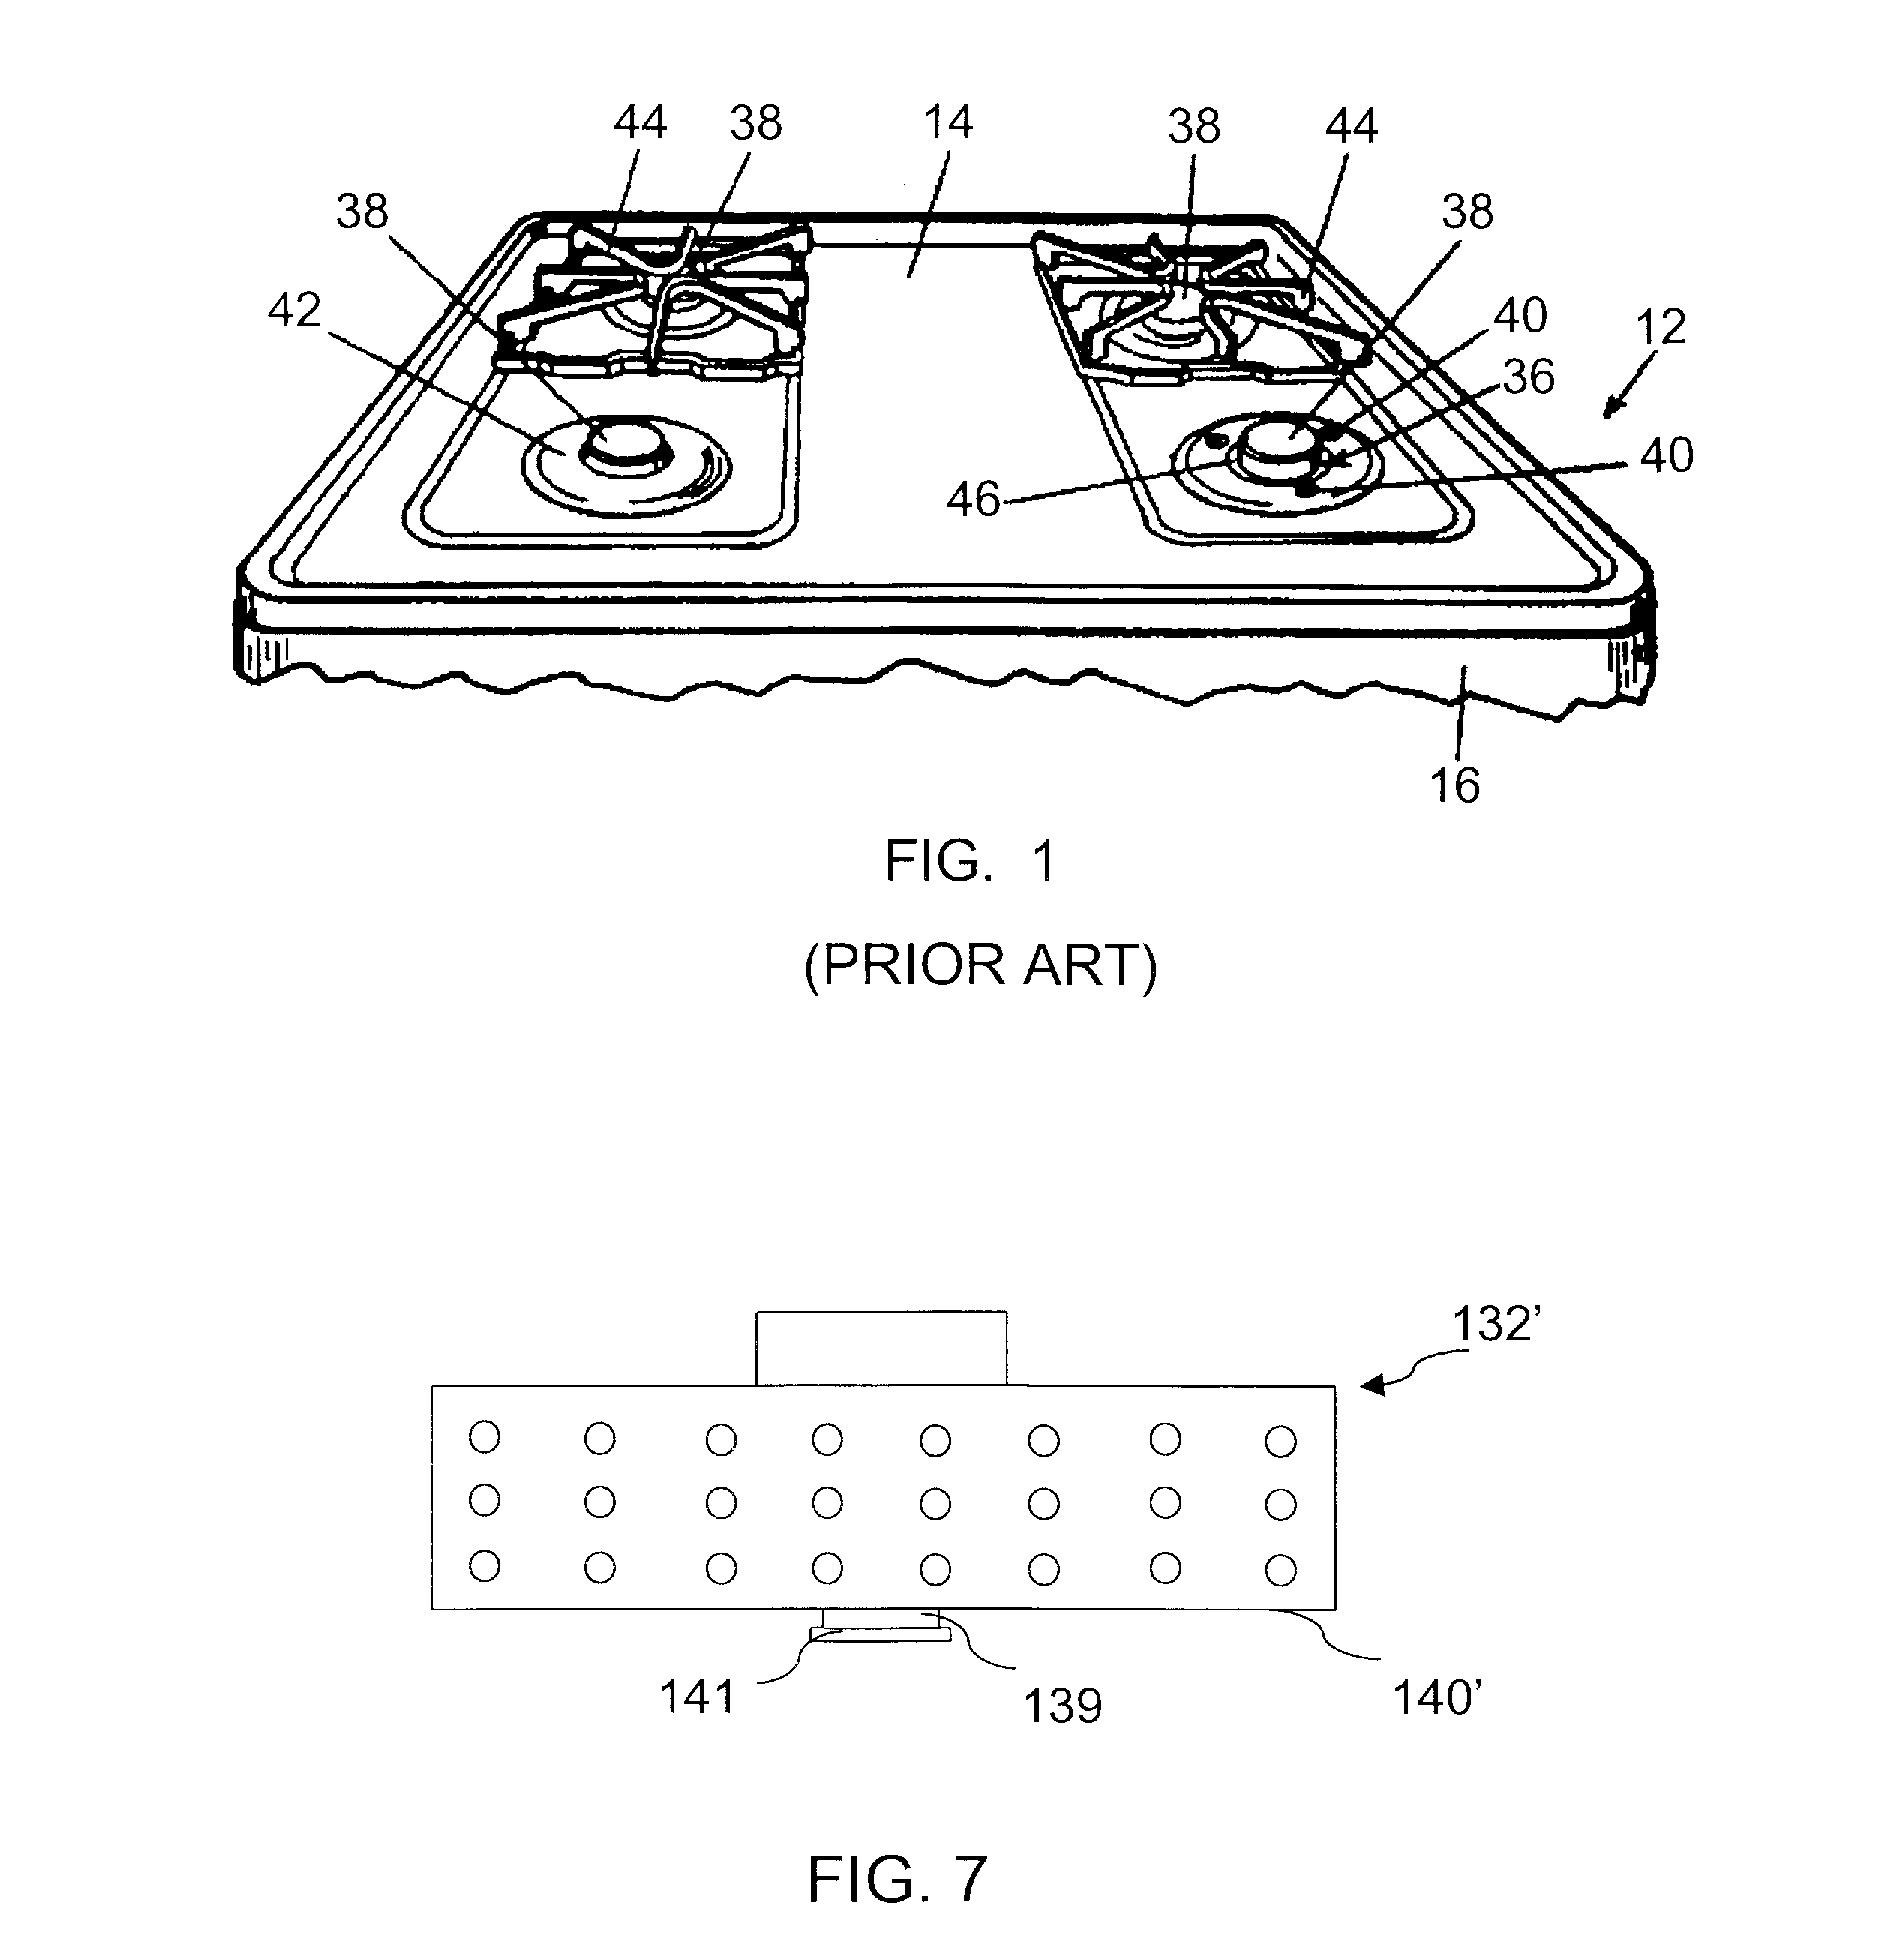 Removable Apparatus To Regulate Flame Heat Transfer And Retain Dripping Liquid Substance For A Gas Stove Burner